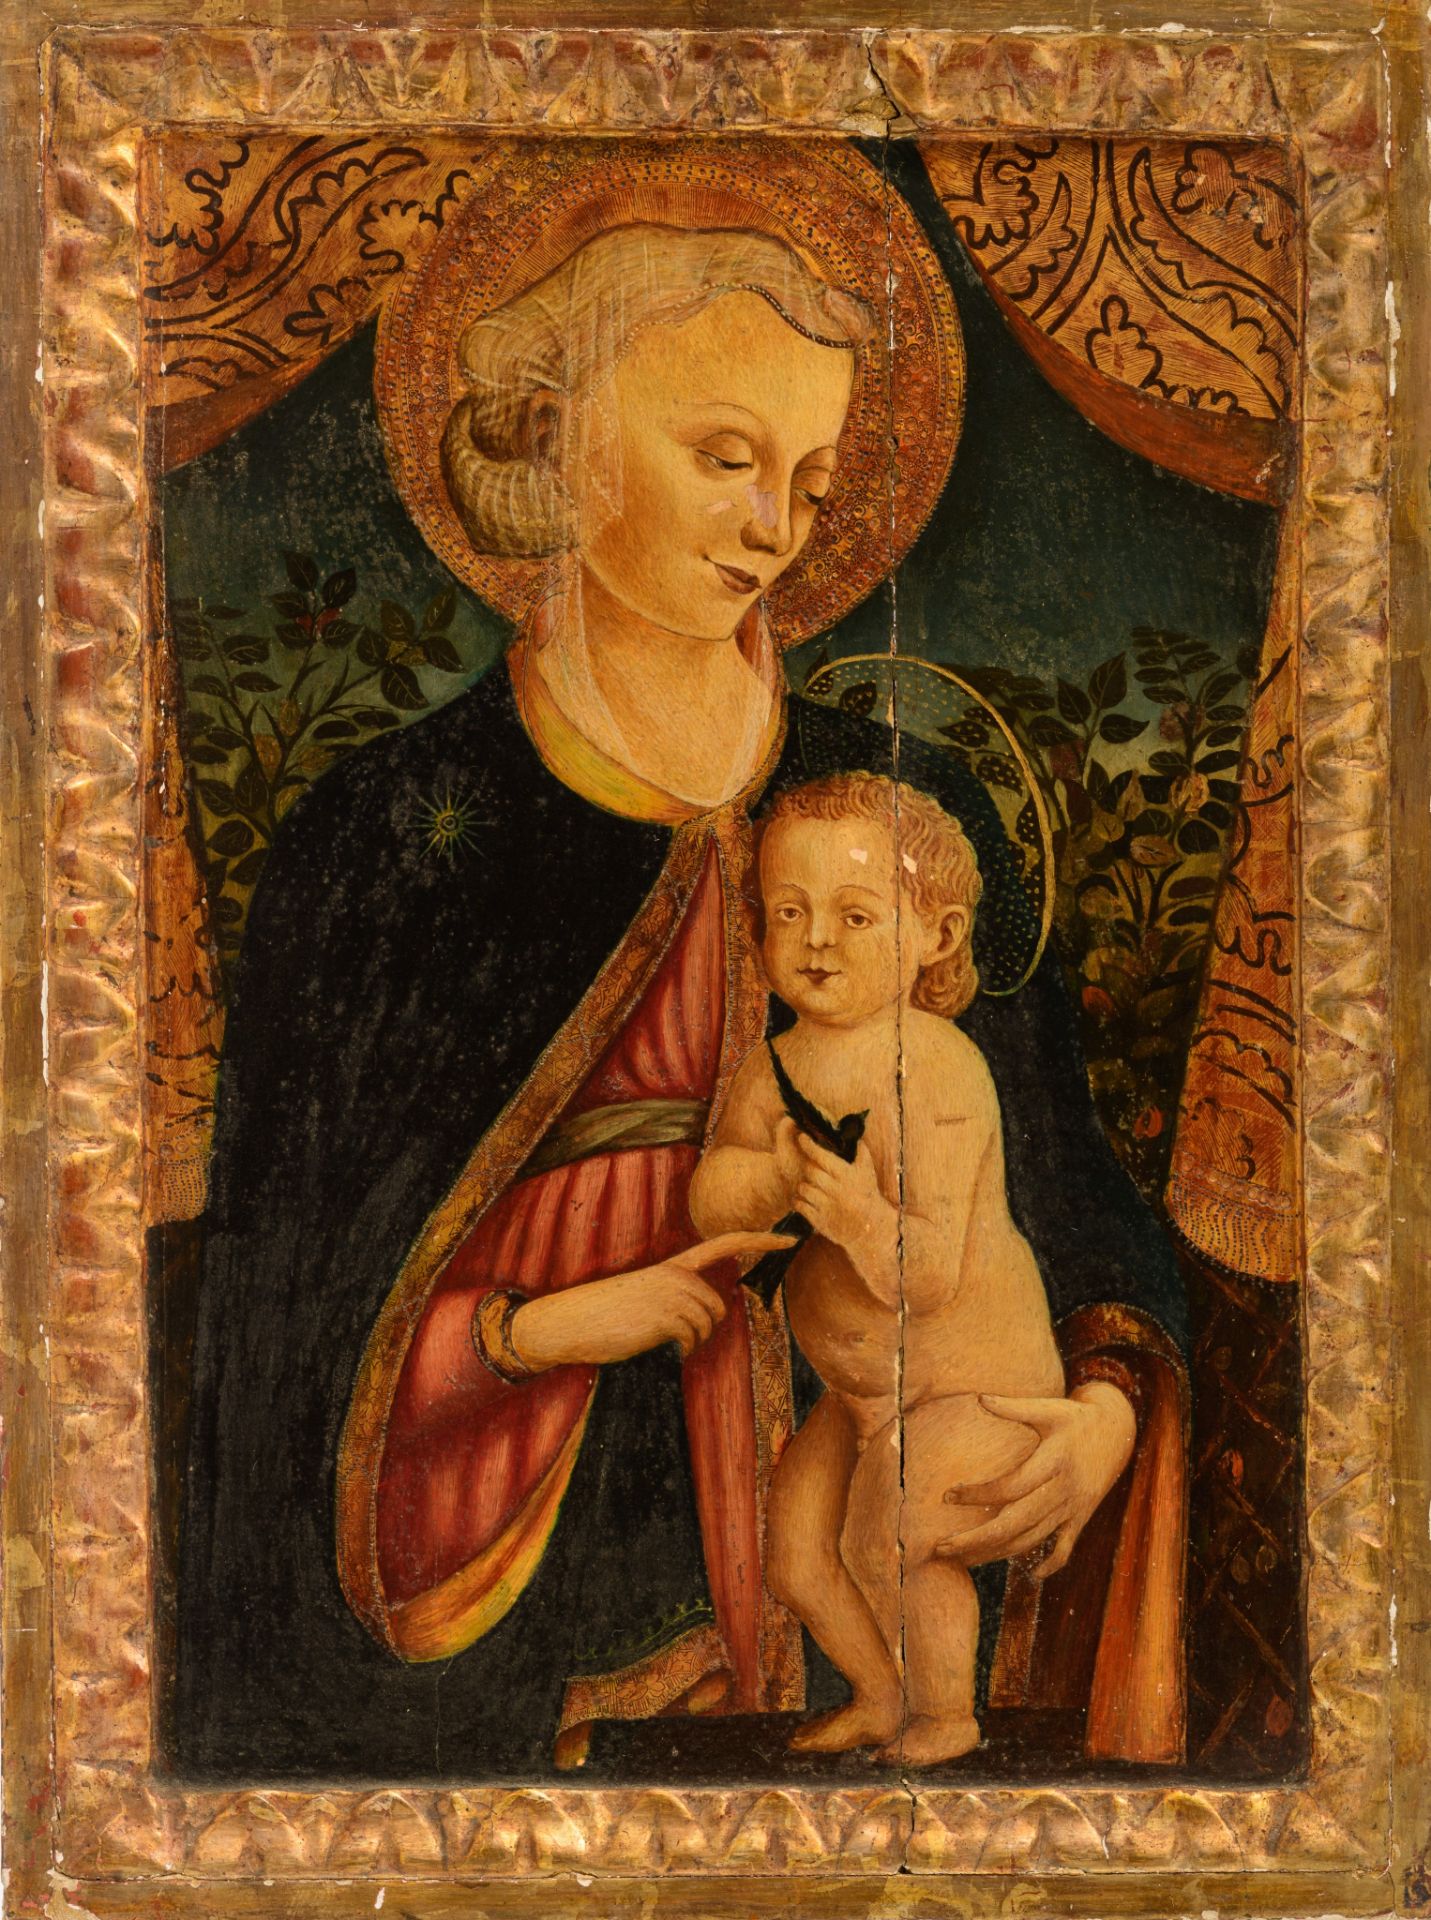 Madonna and Child, in the manner of the Italian Quattrocento, tempera and gold leaves on panel, 51 x